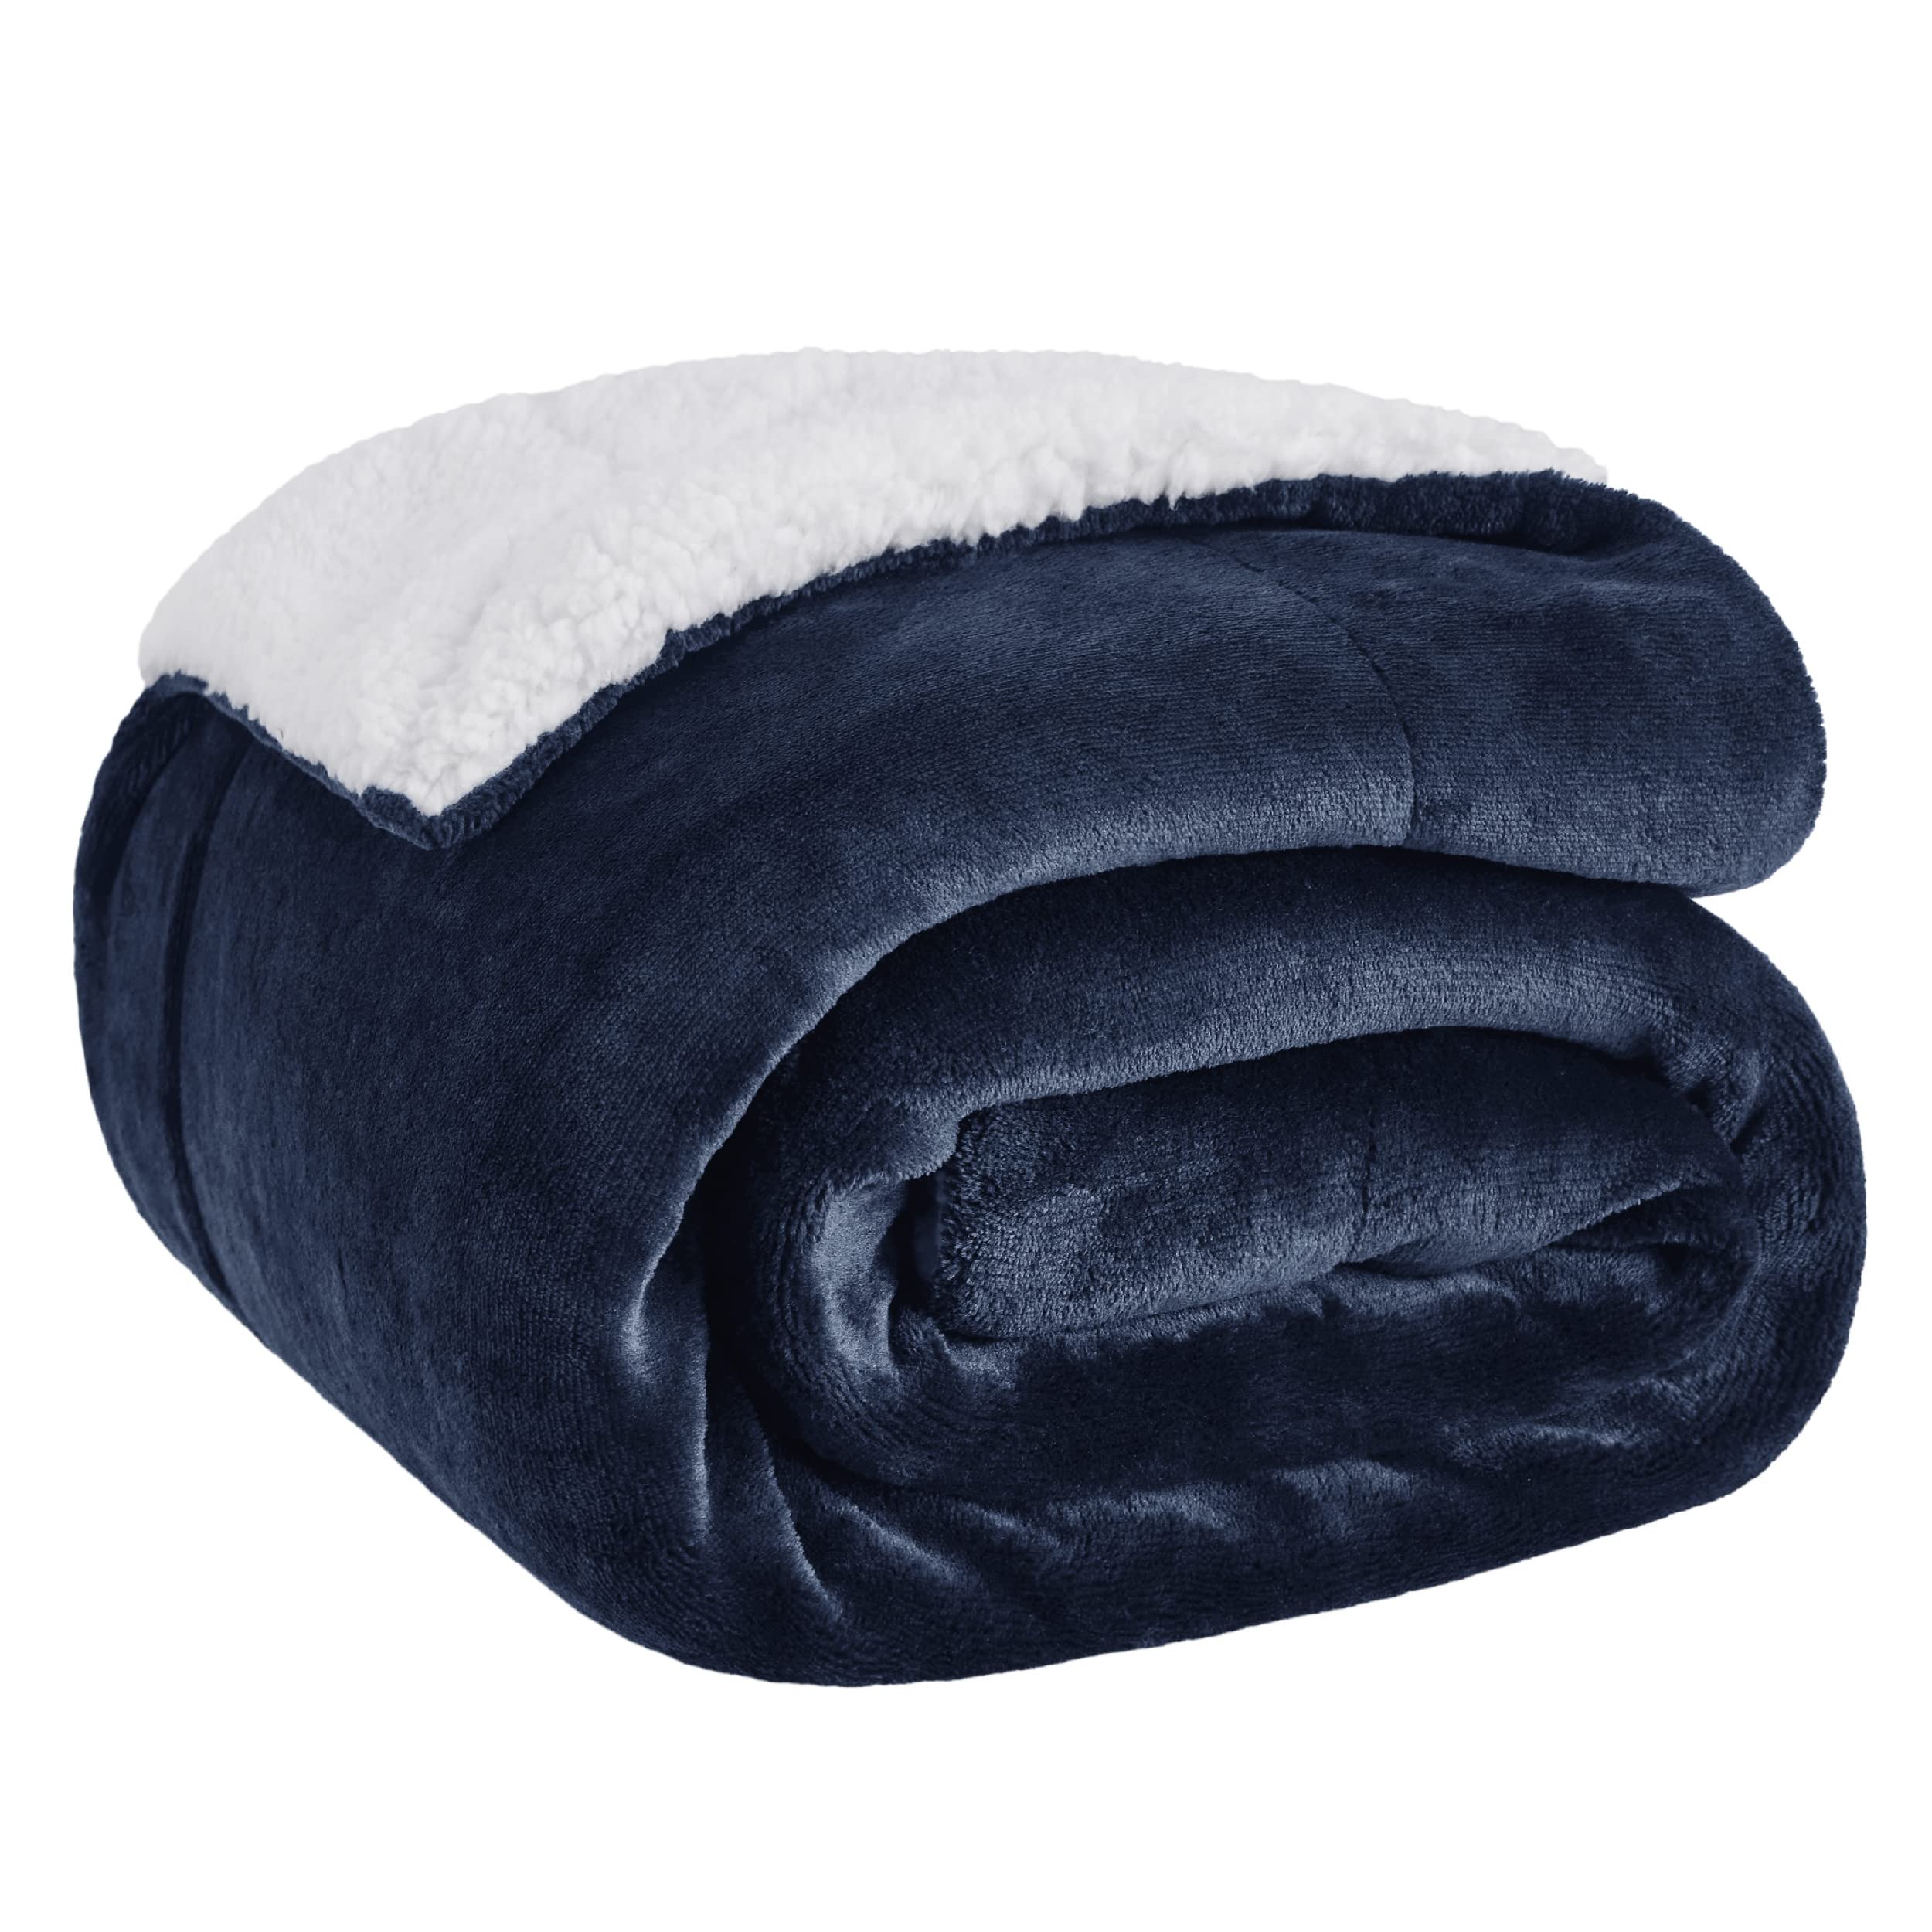 Bedsure Sherpa Fleece Throw Blanket Twin Size for Couch - Thick